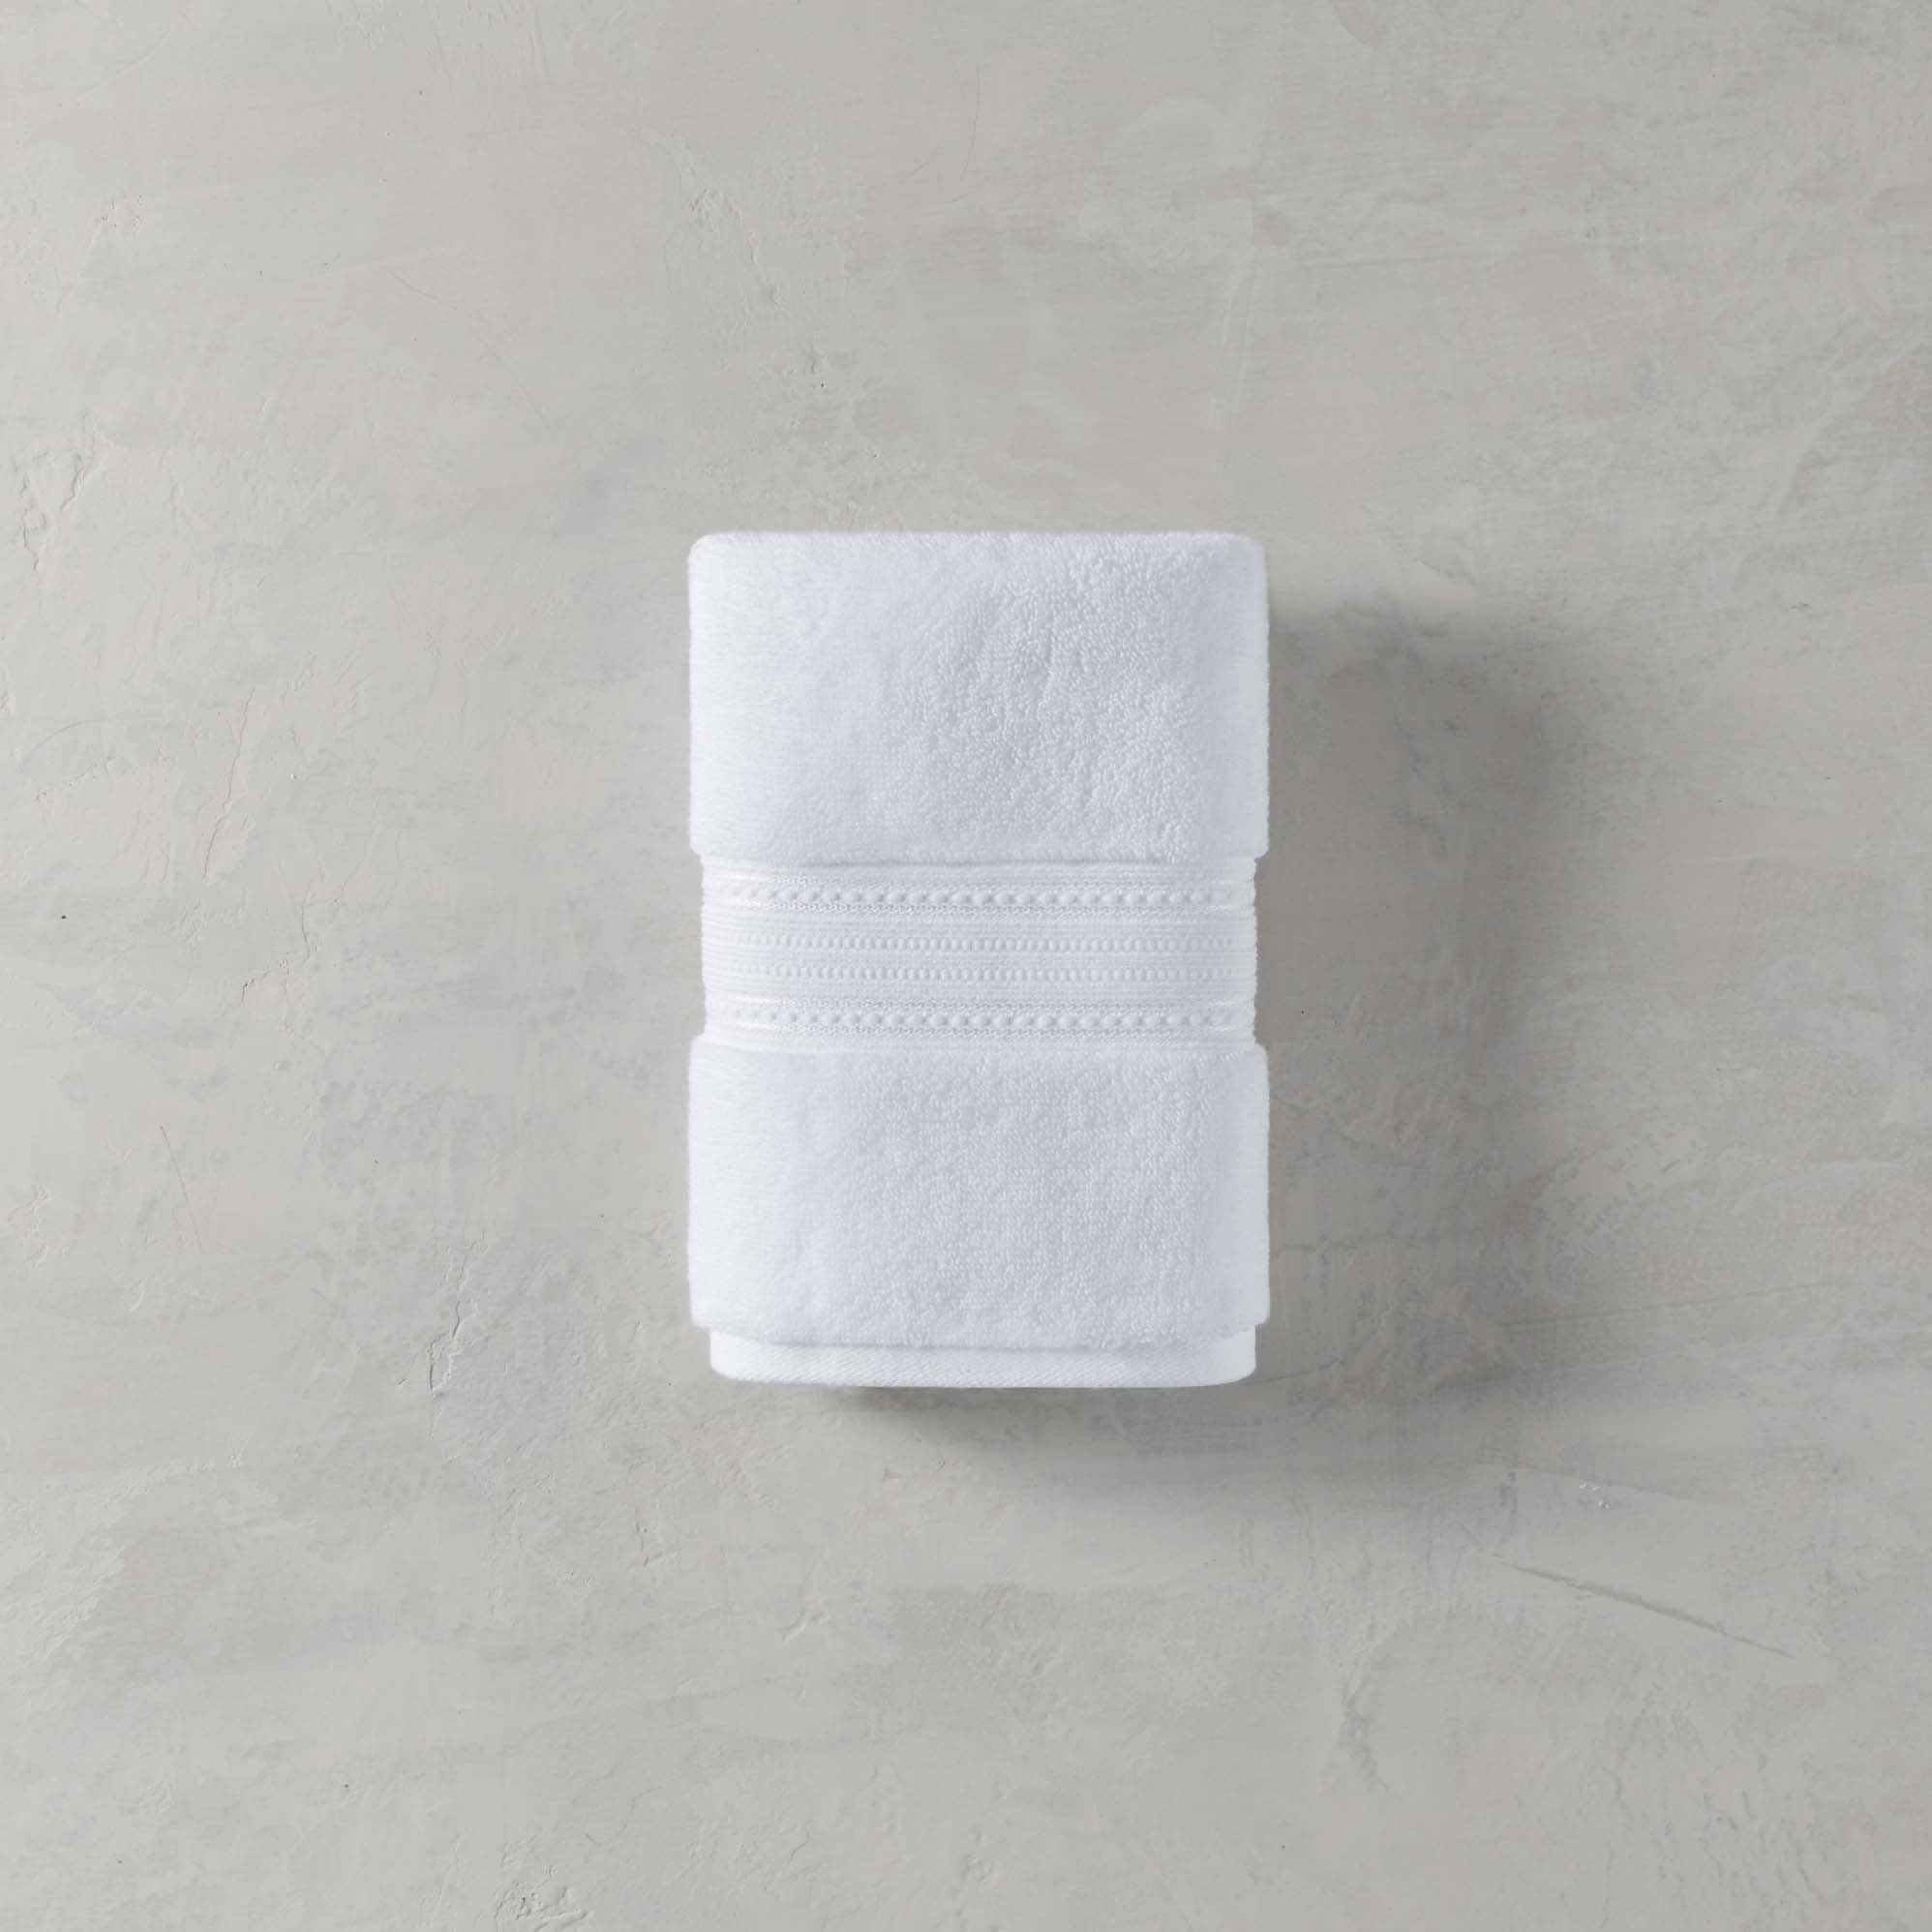 ECOEXISTENCE WHITE SOLID FLUFFY COTTON BATH SHEET,HAND TOWEL OR 4 WASHCLOTHS